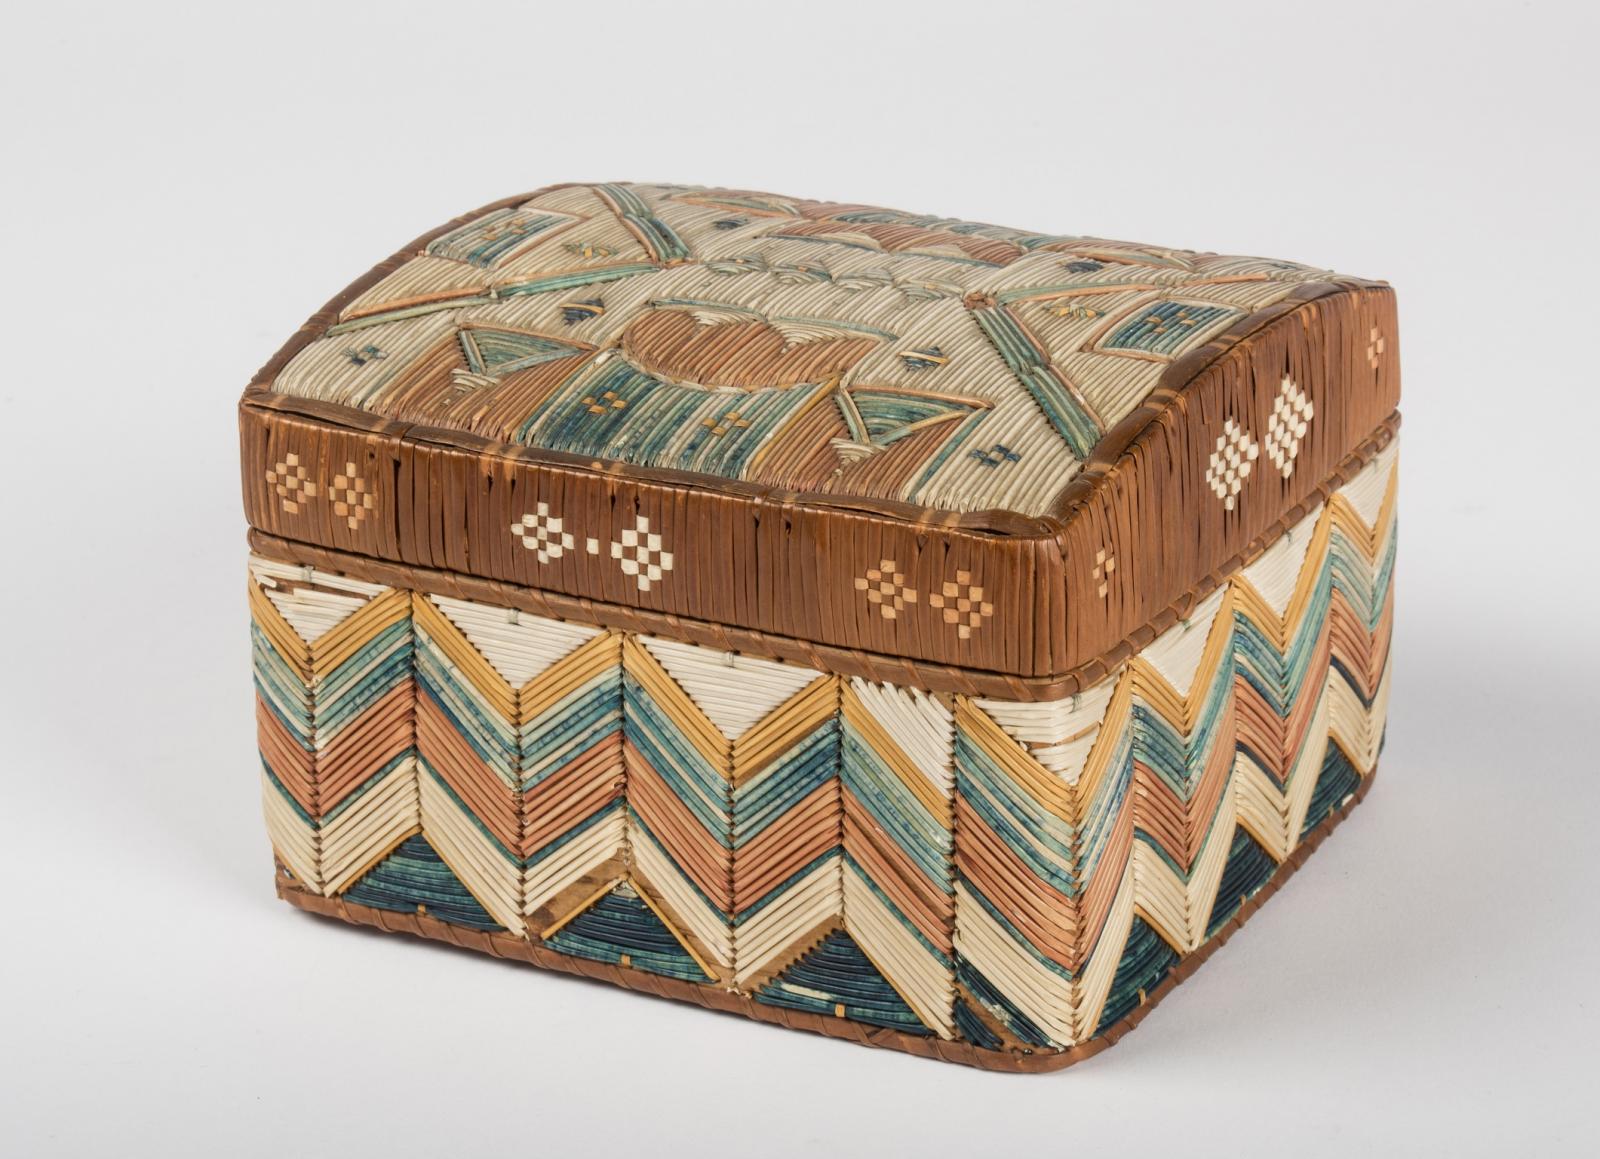 Angled view of a small colorful box with a lid, decorated with lengths of porcupine quills forming a geometric design on the lid and chevron patterns on sides.